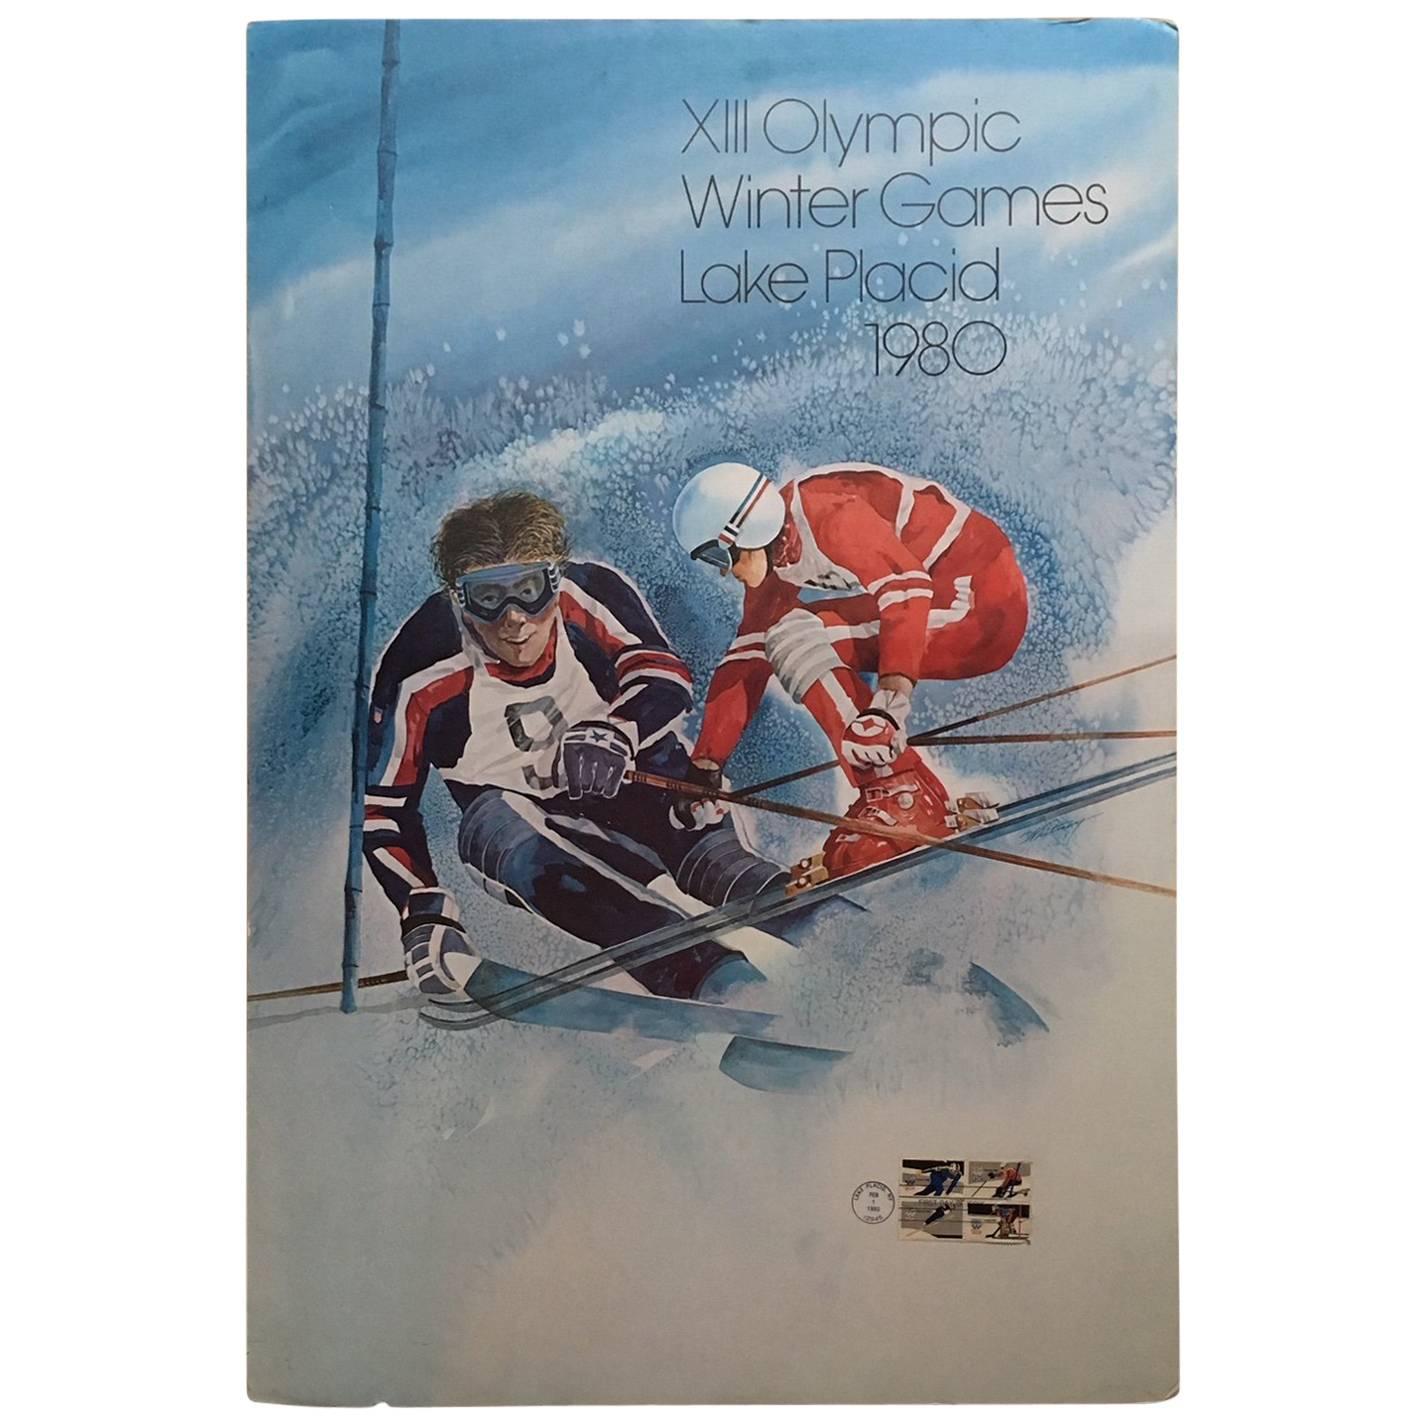 Original Skiing Poster from the 1980 Winter Olympics in Lake Placid